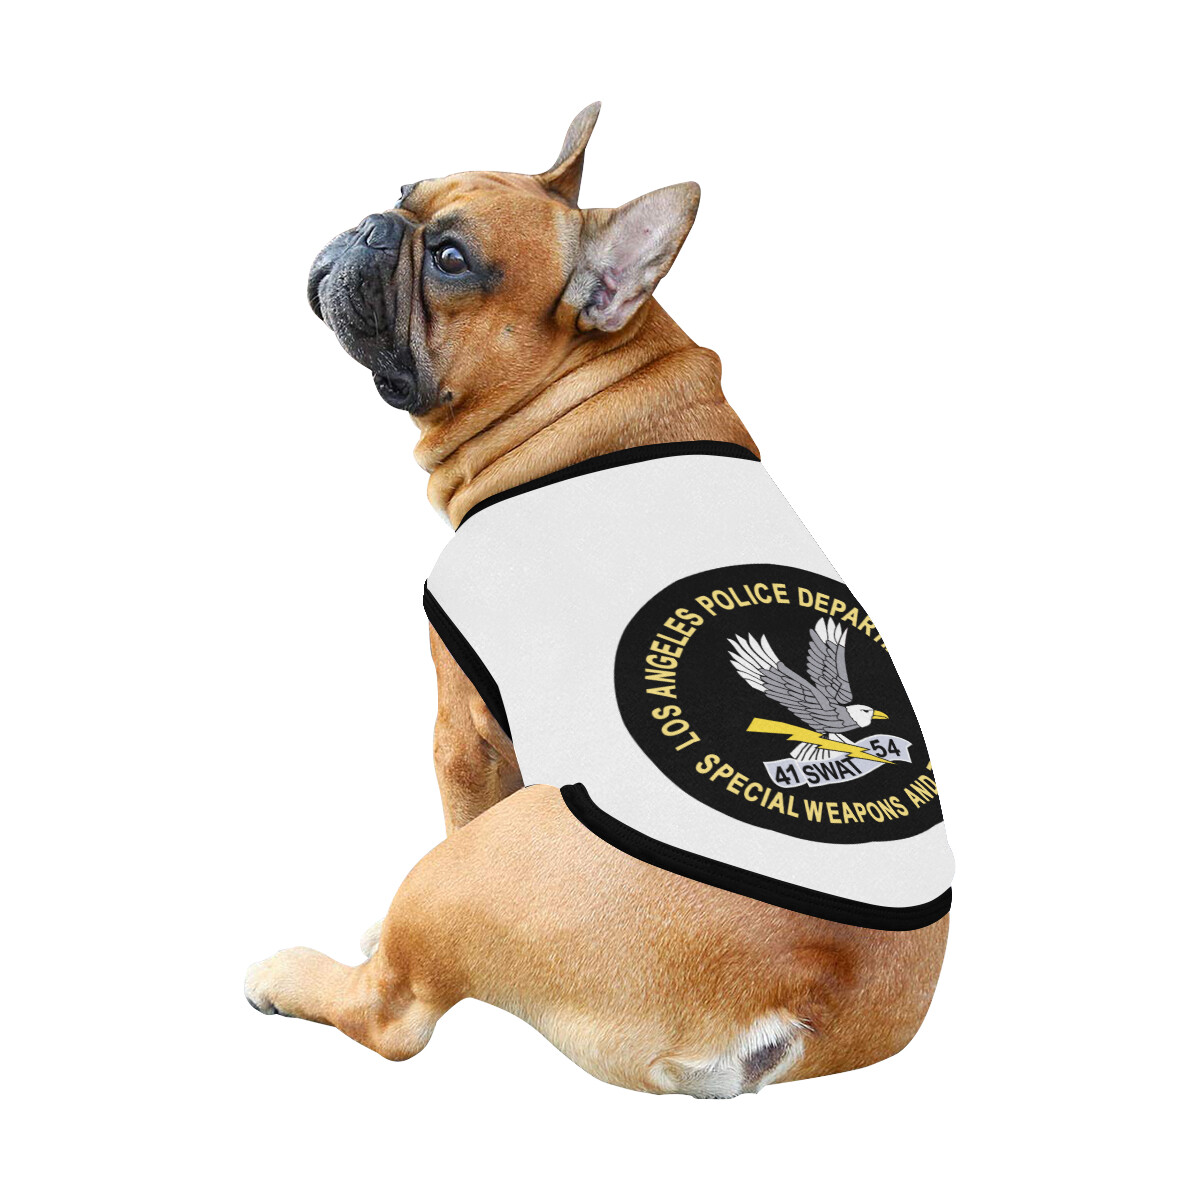 🐕 SWAT LAPD Los Angeles Police Department Dog shirt, Dog Tank Top, Dog t-shirt, Dog clothes, Gifts, front back print, 7 sizes XS to 3XL, dog gifts, white